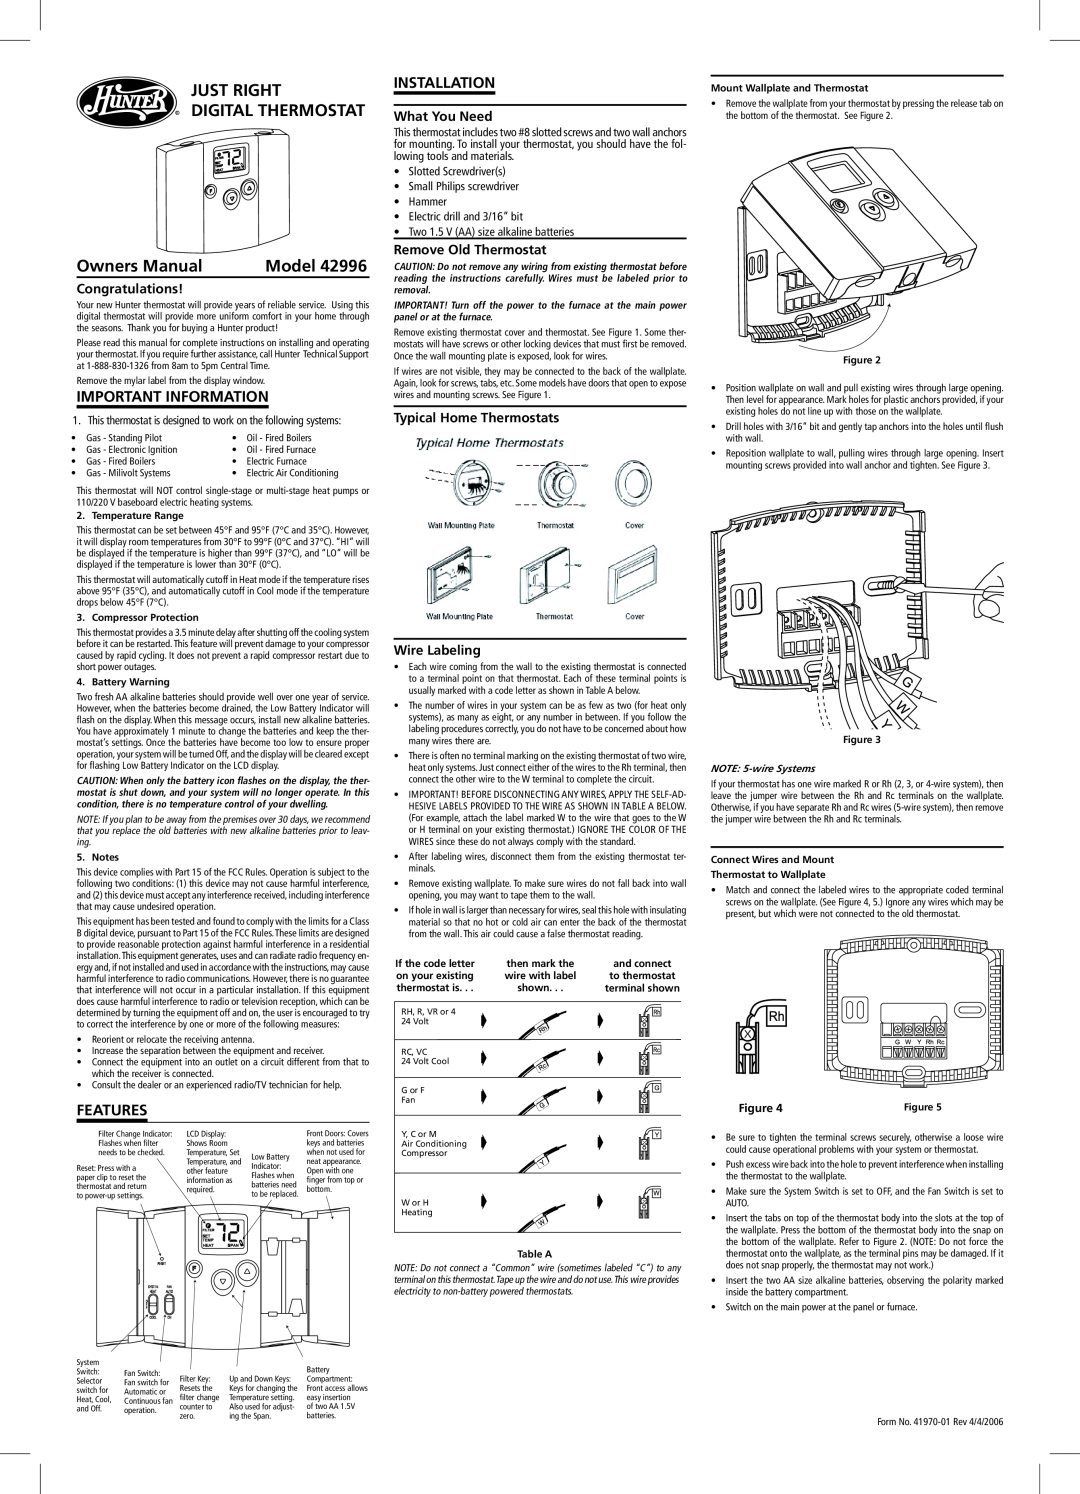 Hunter Fan 42996 owner manual Just Right Digital Thermostat, Owners Manual, Model, Important Information, Features 